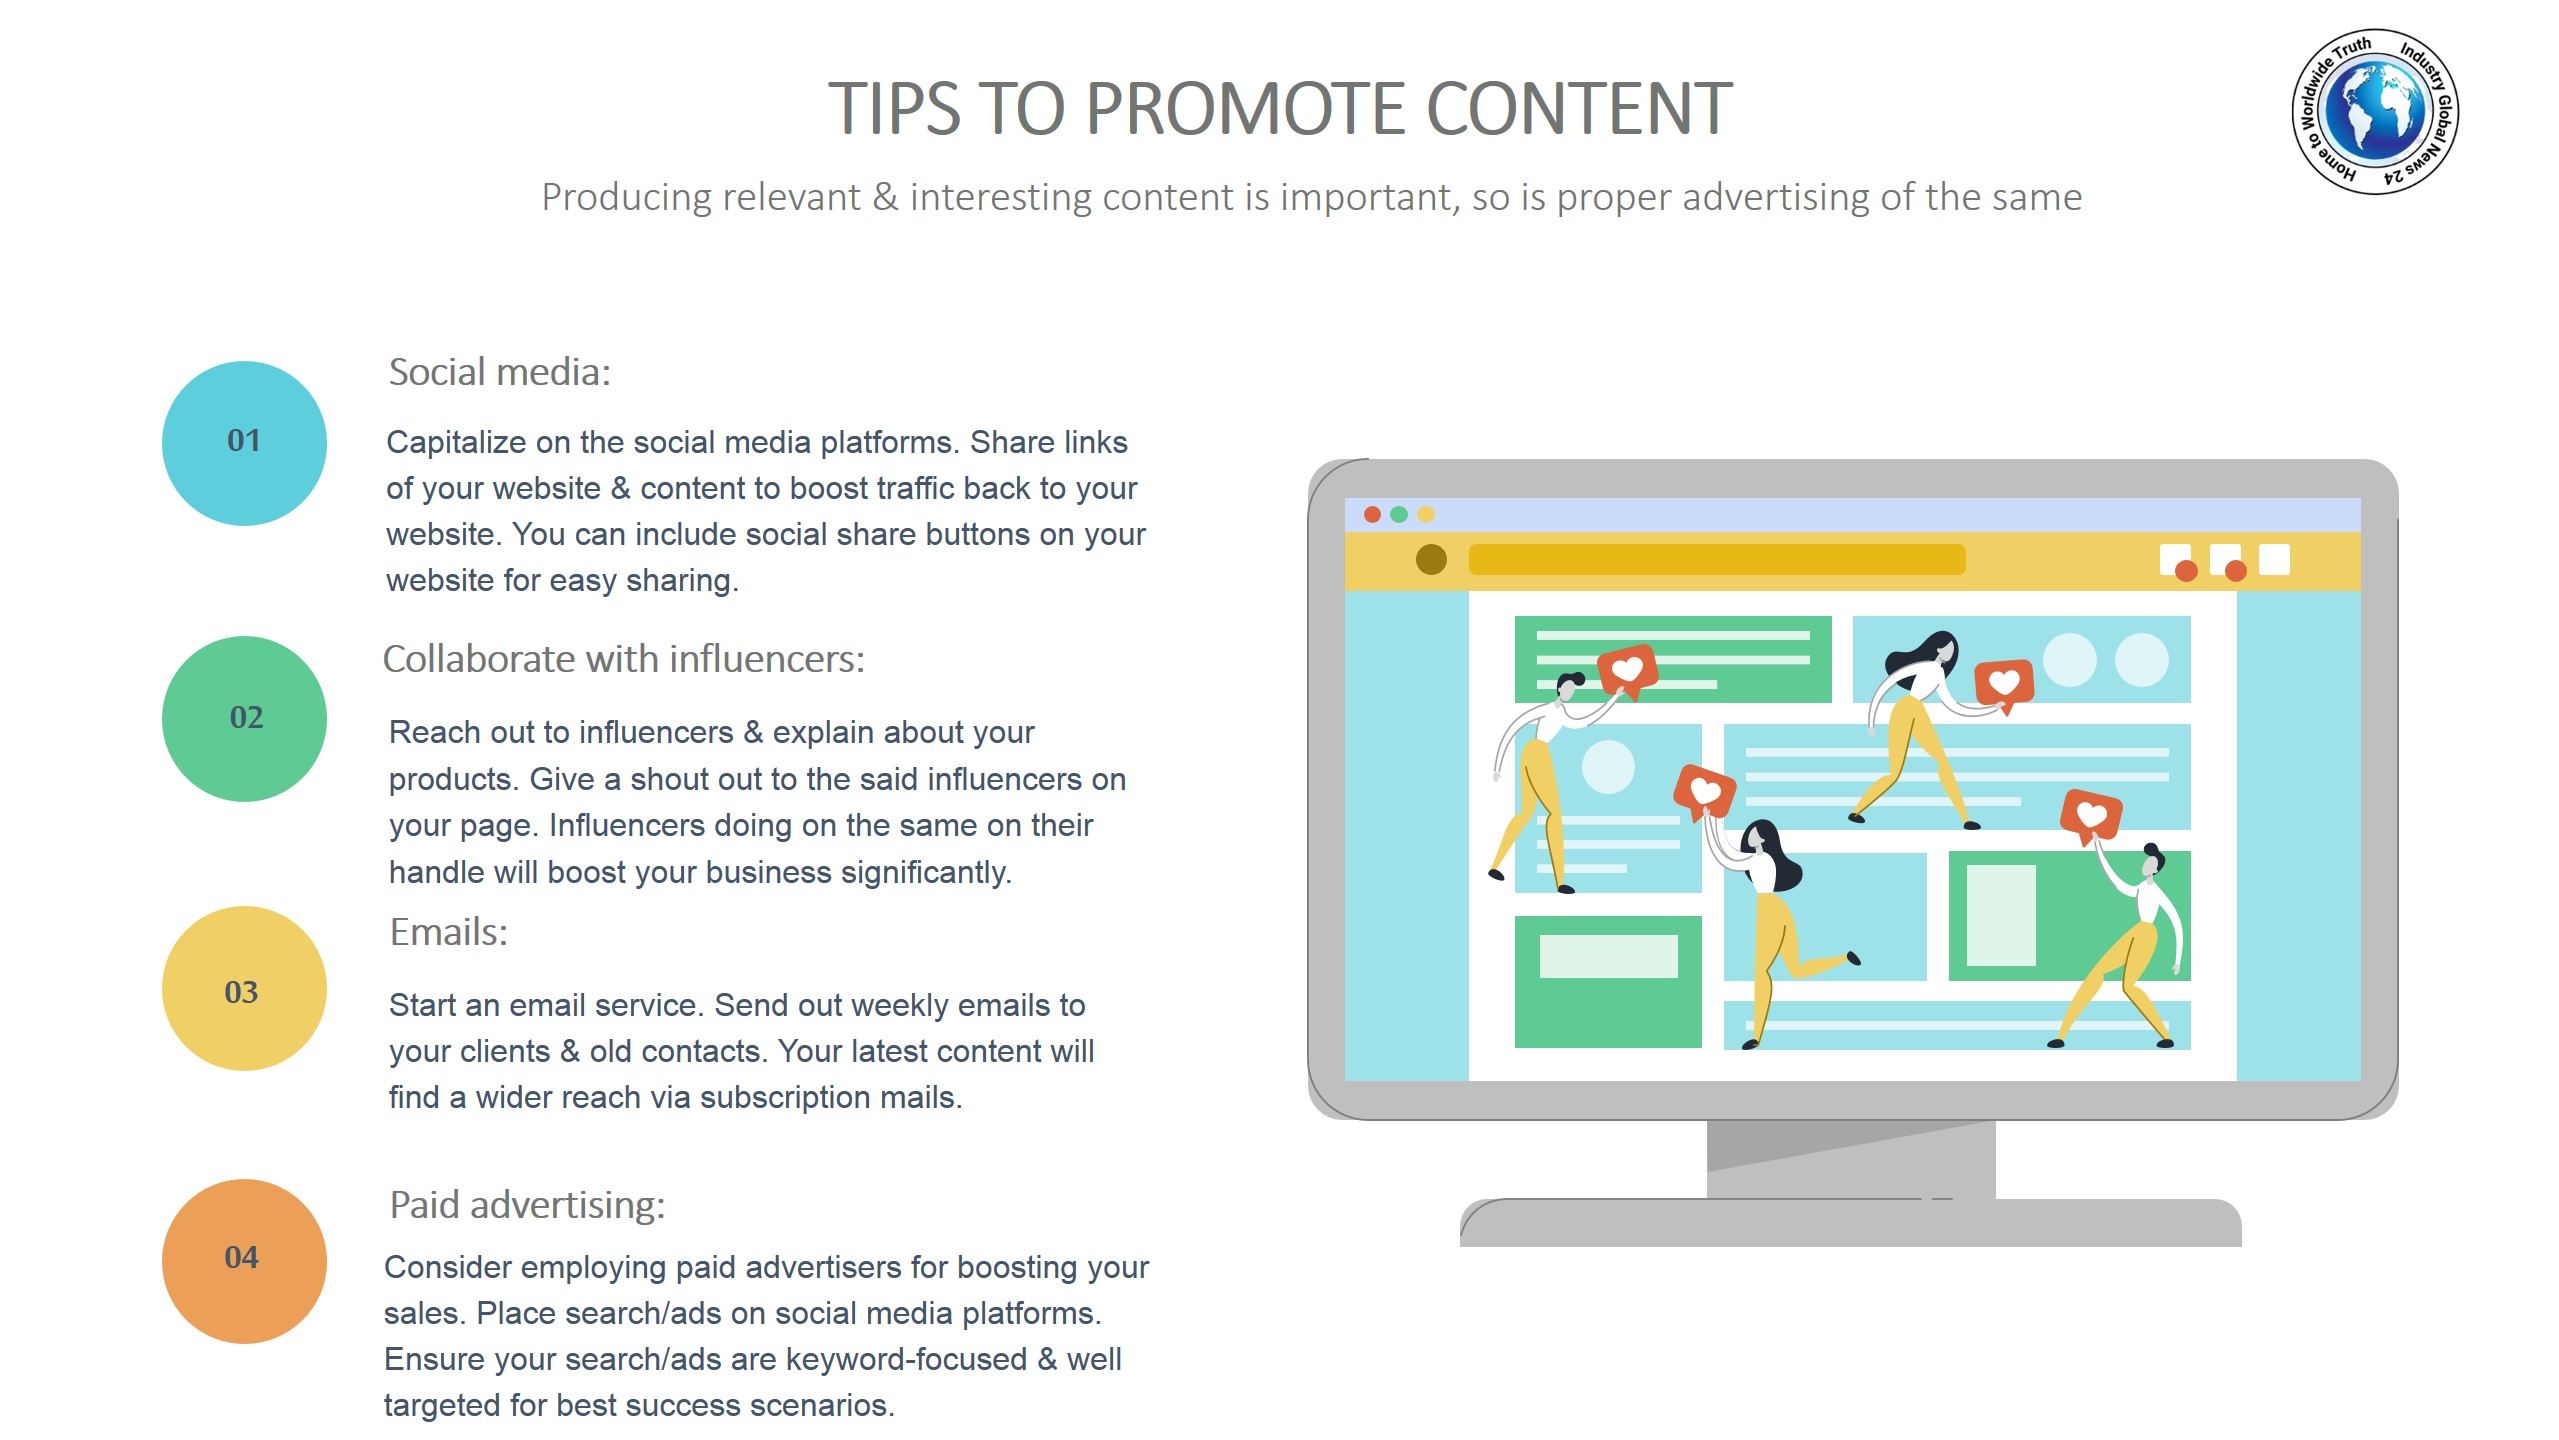 Tips to promote content